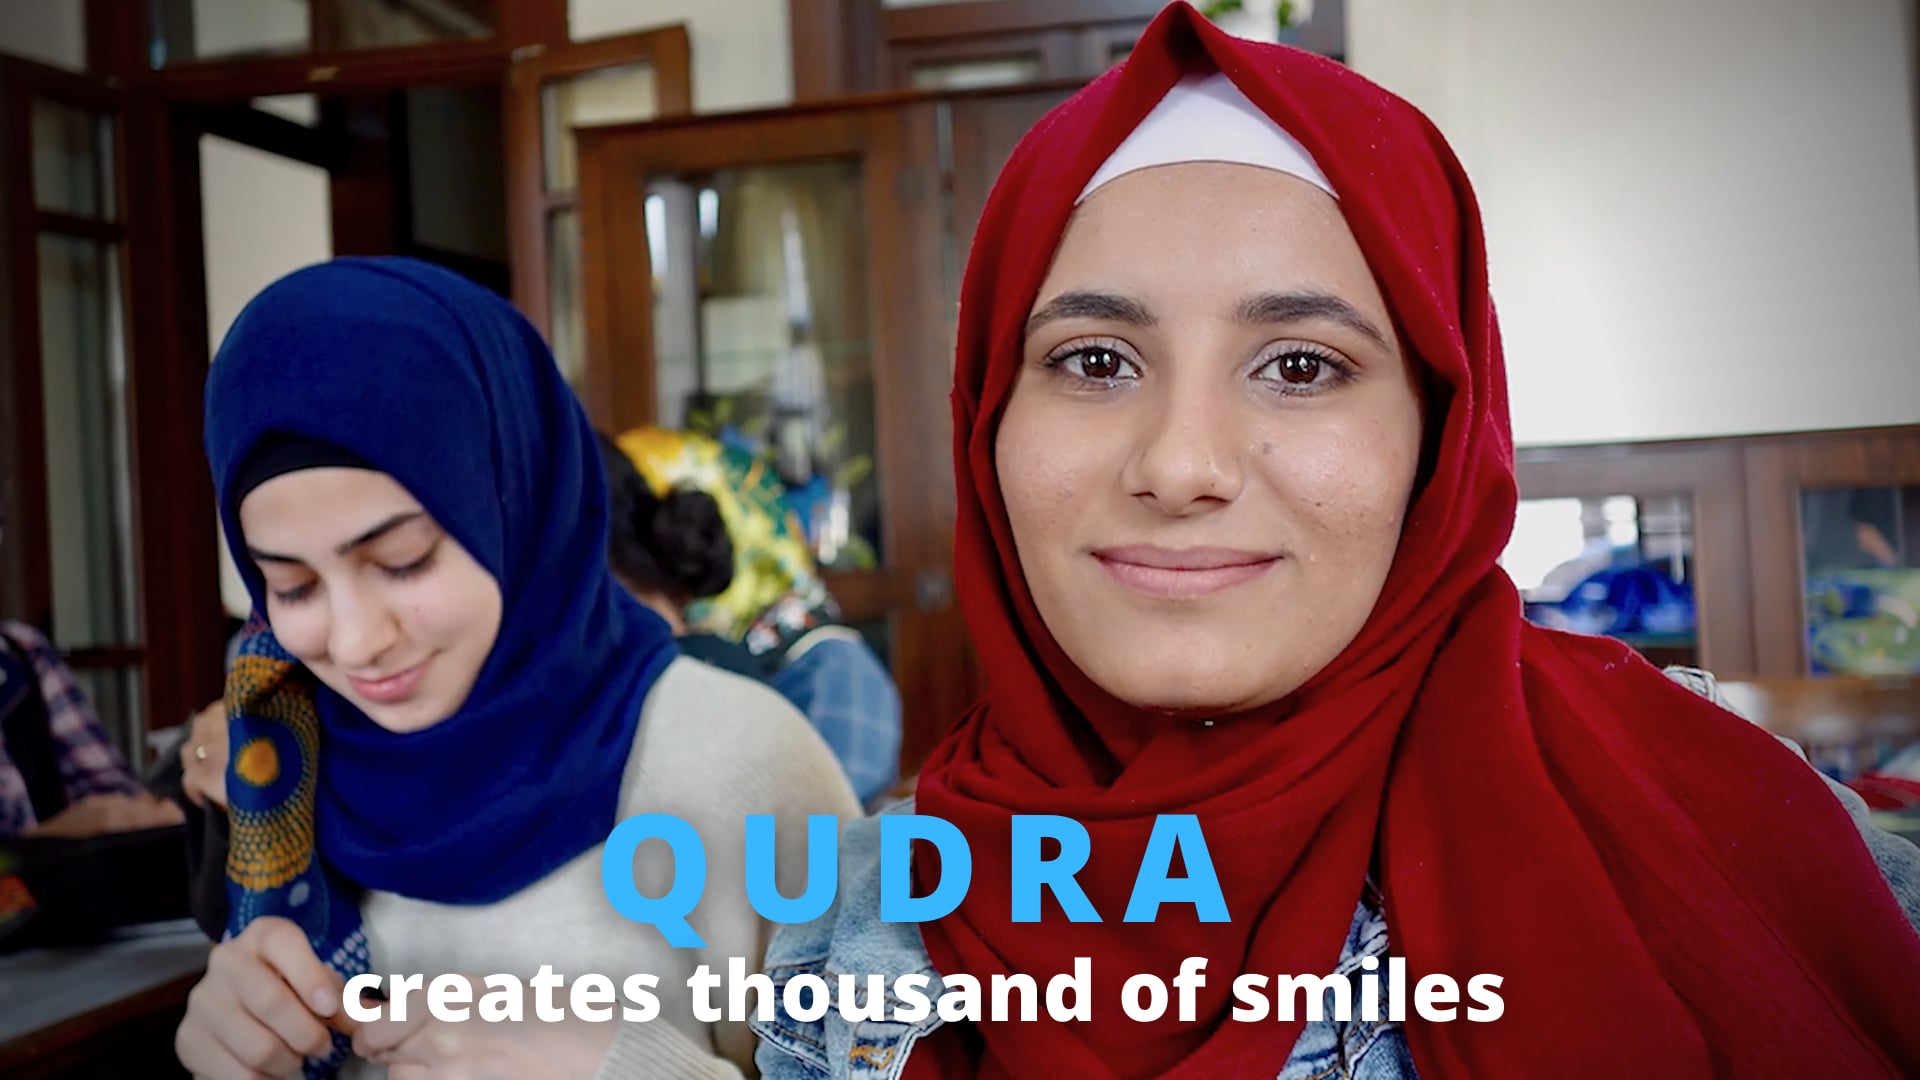 QUDRA created thousands of smile